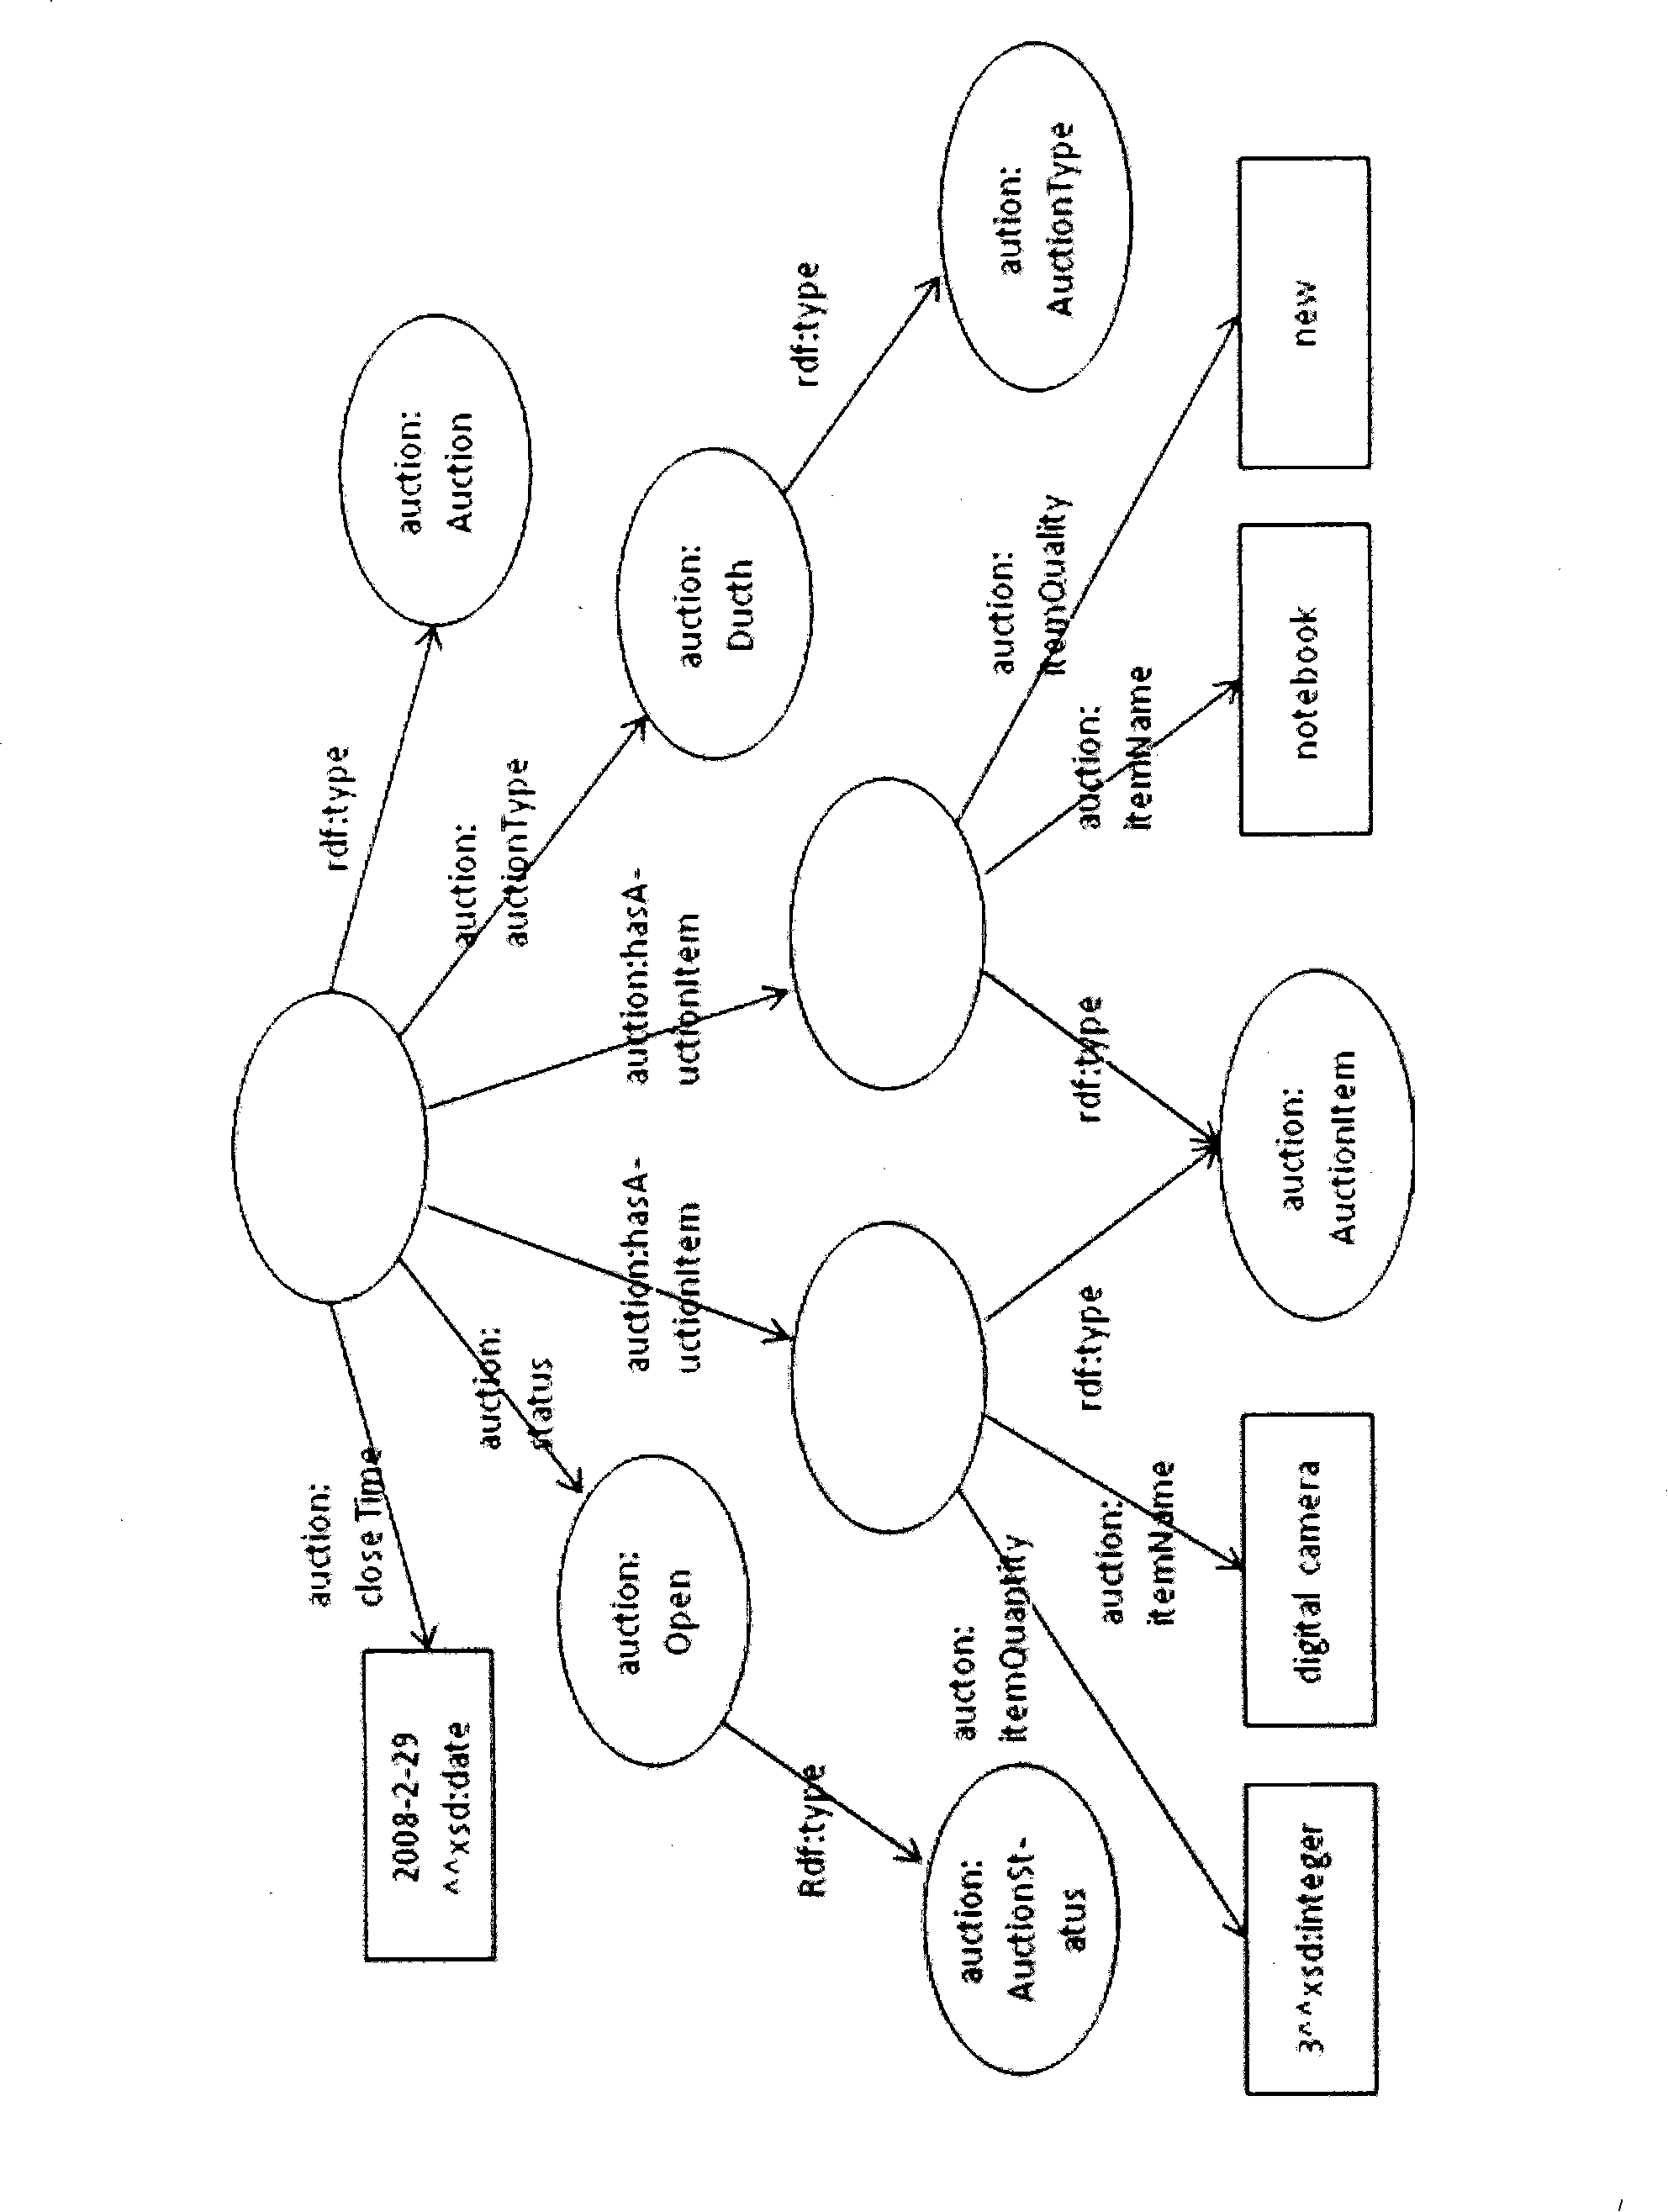 Semantic matching algorithm of large scale issuance and subscription system